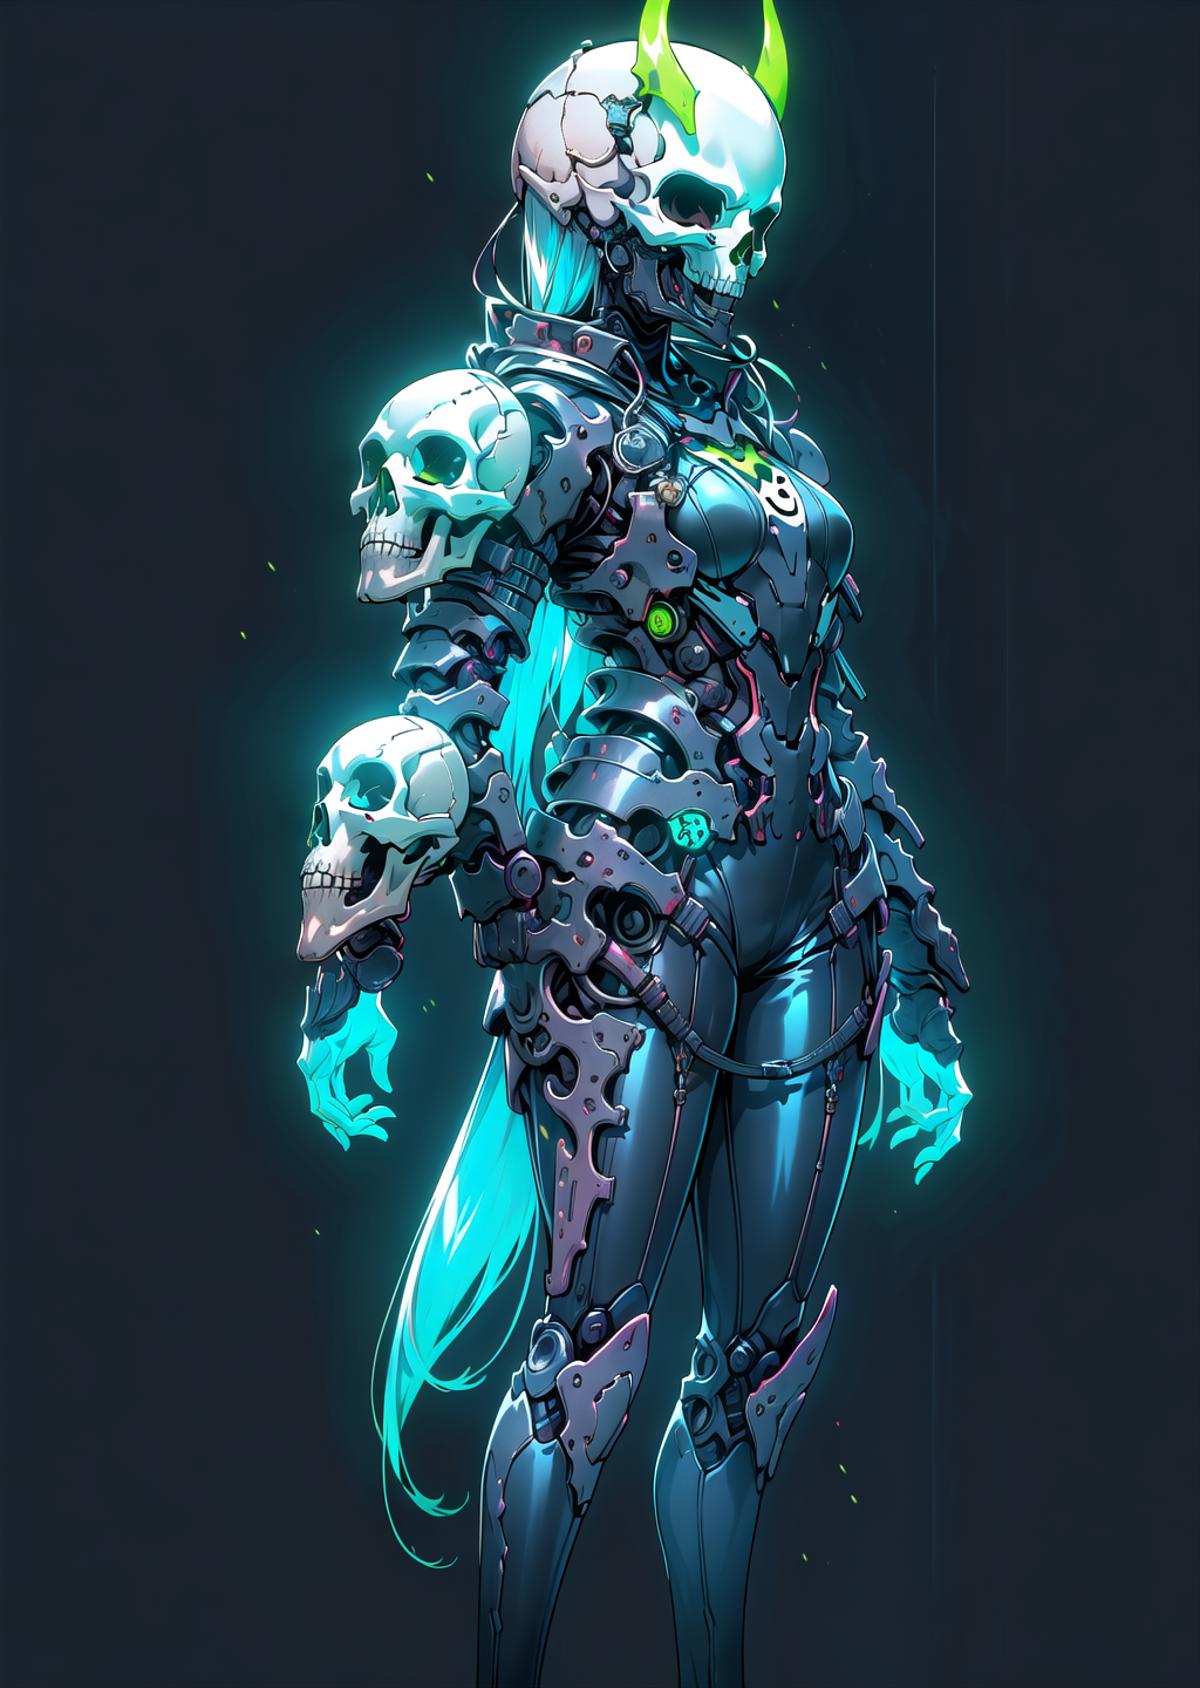 Cyberskull Armour image by Barons